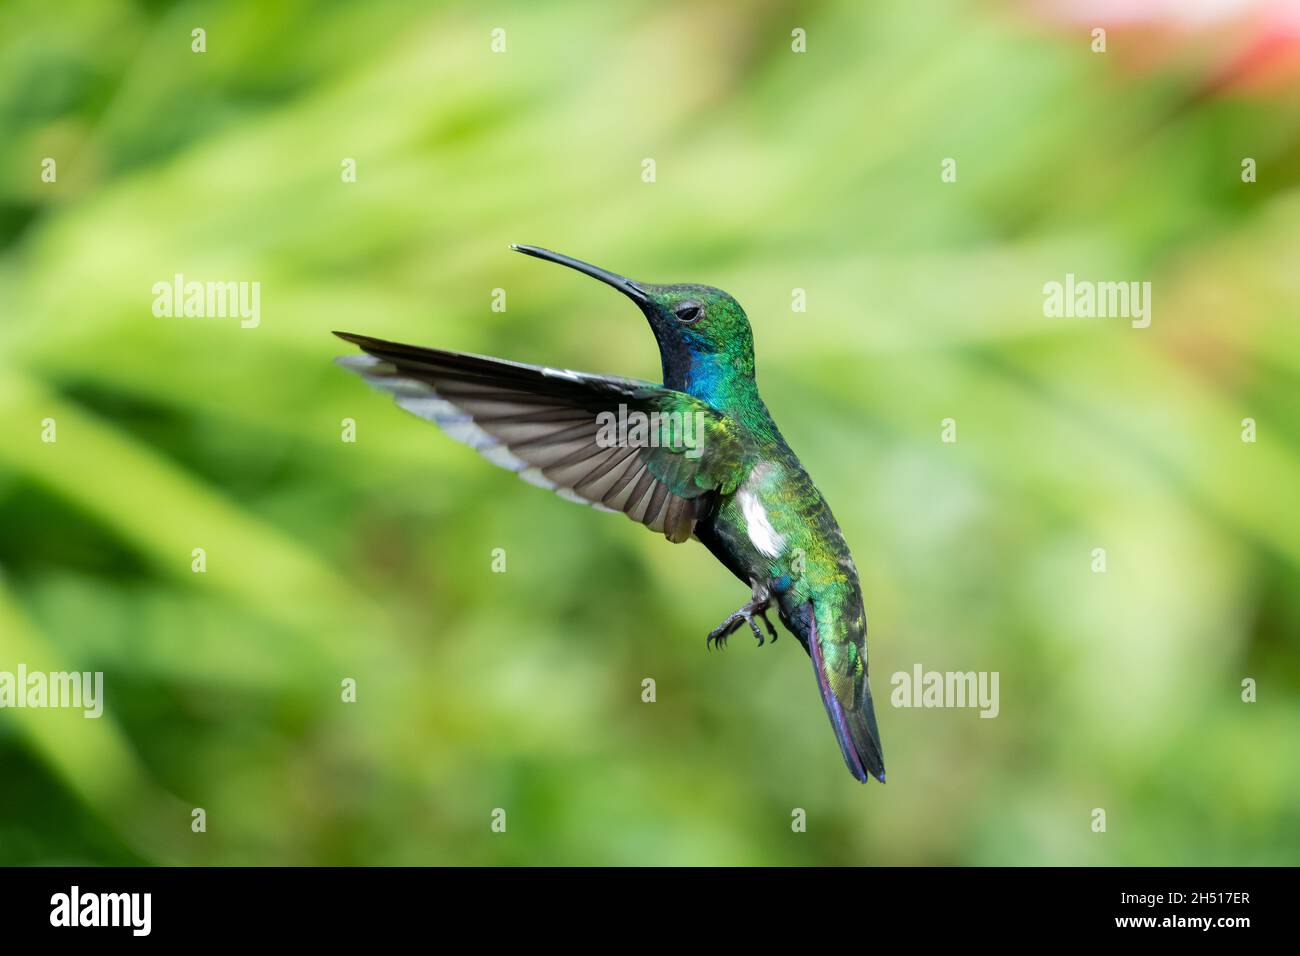 Male Black-throated Mango hummingbird, Anthracothorax nigricollis, hovering in a tropical garden in the bright sunlight. Stock Photo